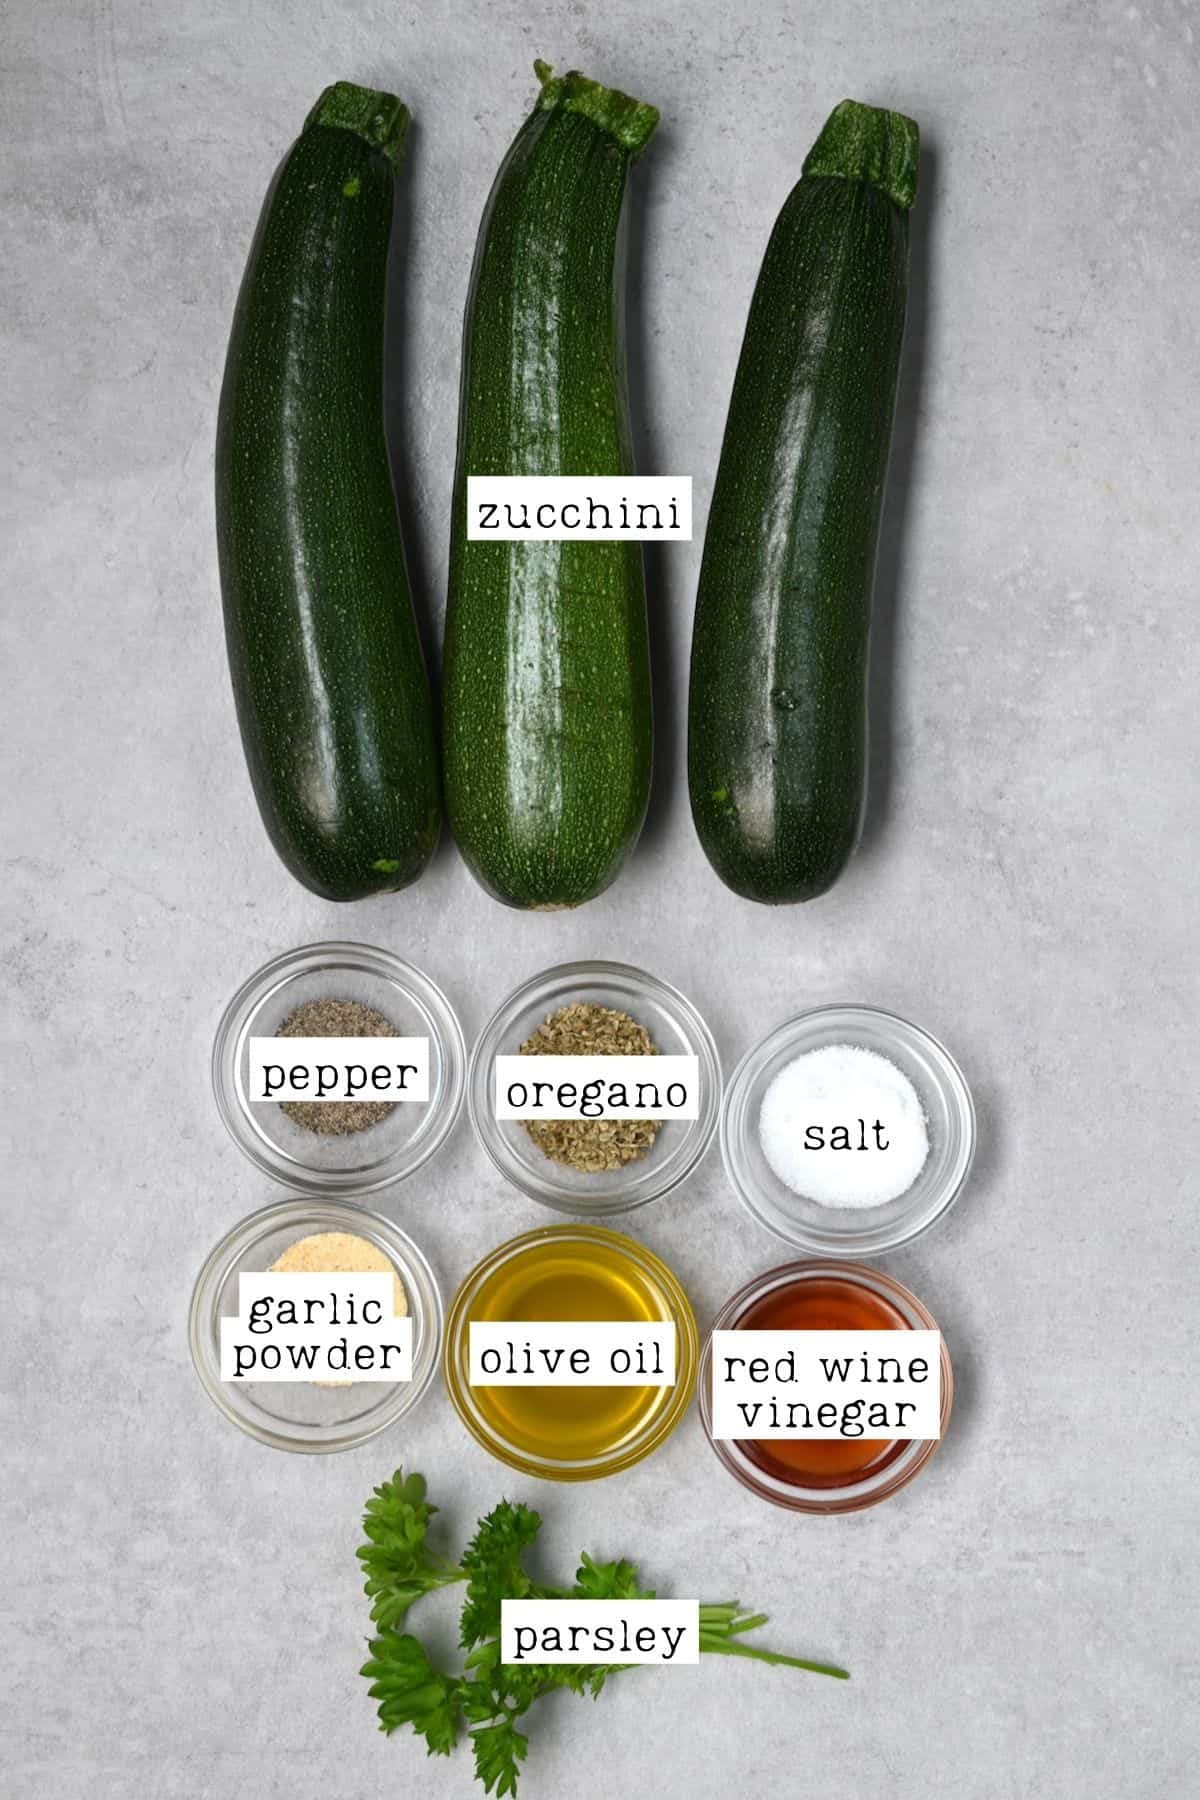 Ingredients for grilled zucchini